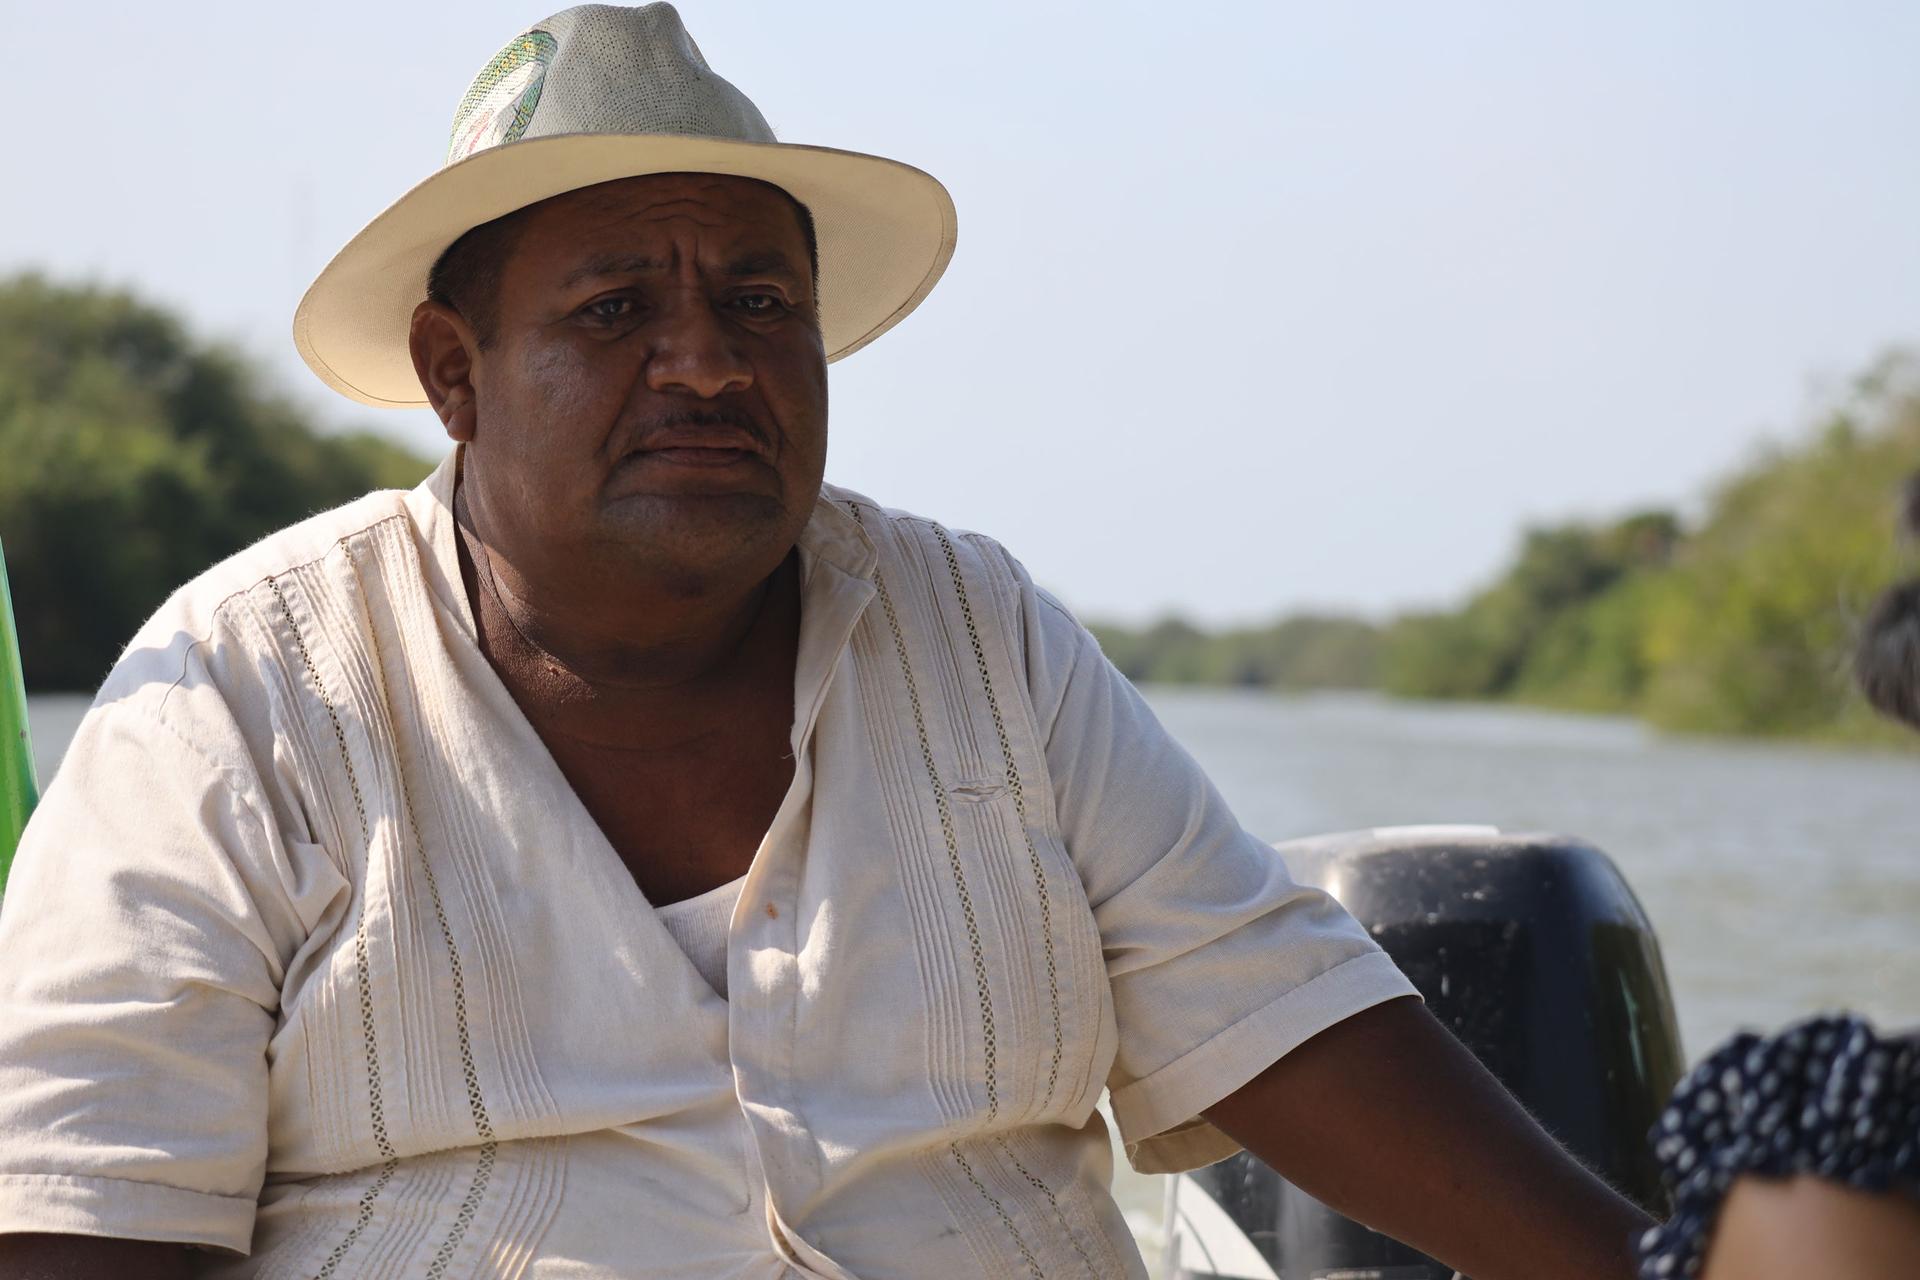 Asuncion Hernandez Garcia, a tour guide and fisherman who goes by the name Negro Chon, often takes groups out on the water in his boat.